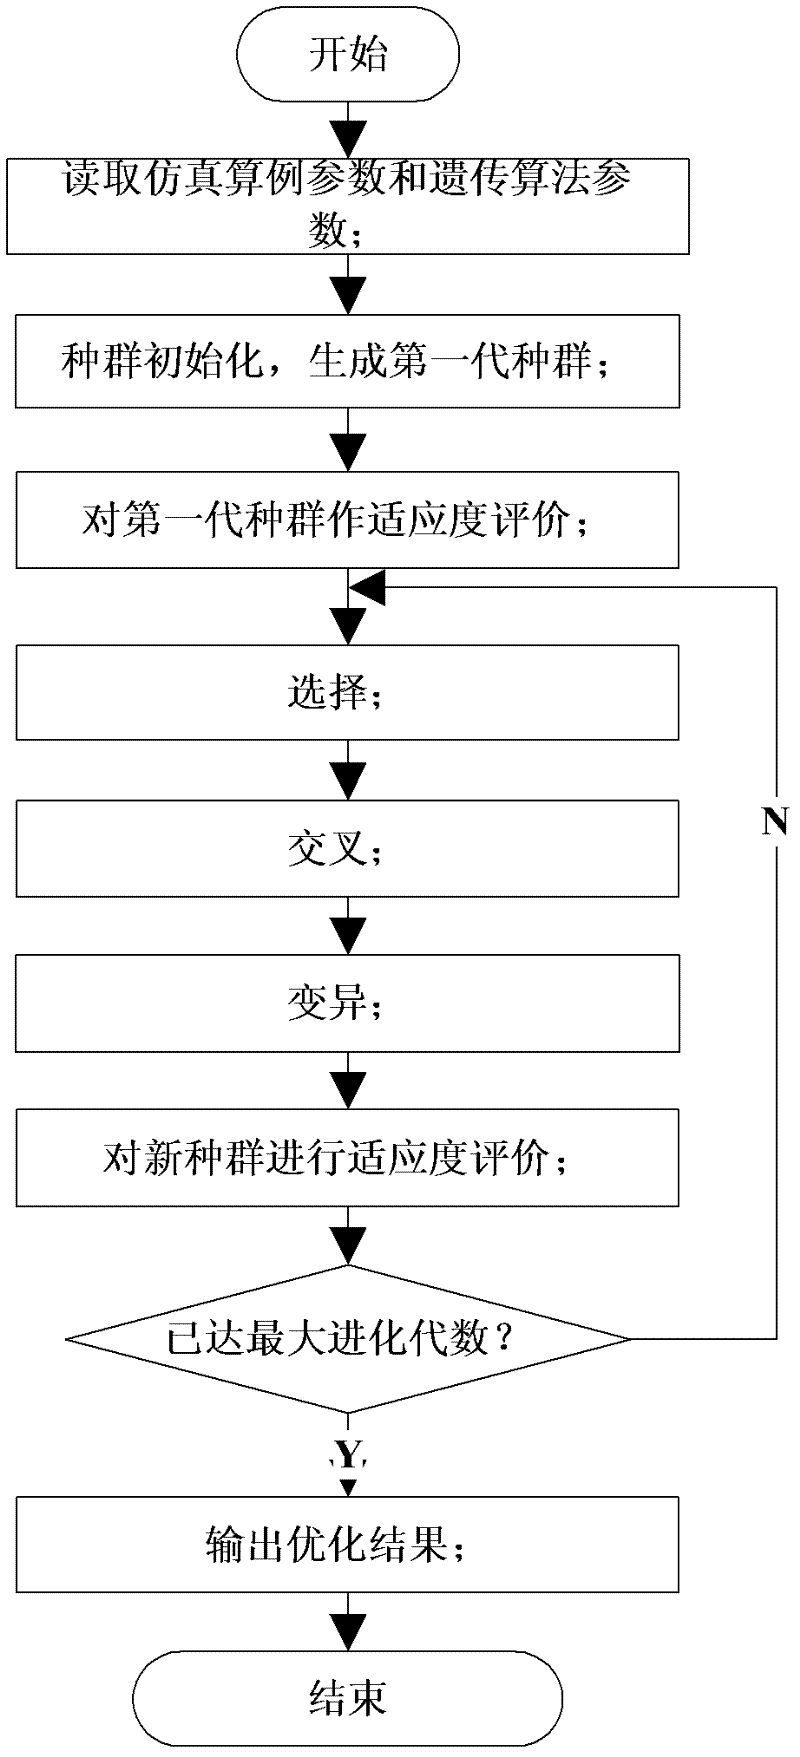 Bilayer planning method for intelligent scheduling for steelmaking-continuous welding production